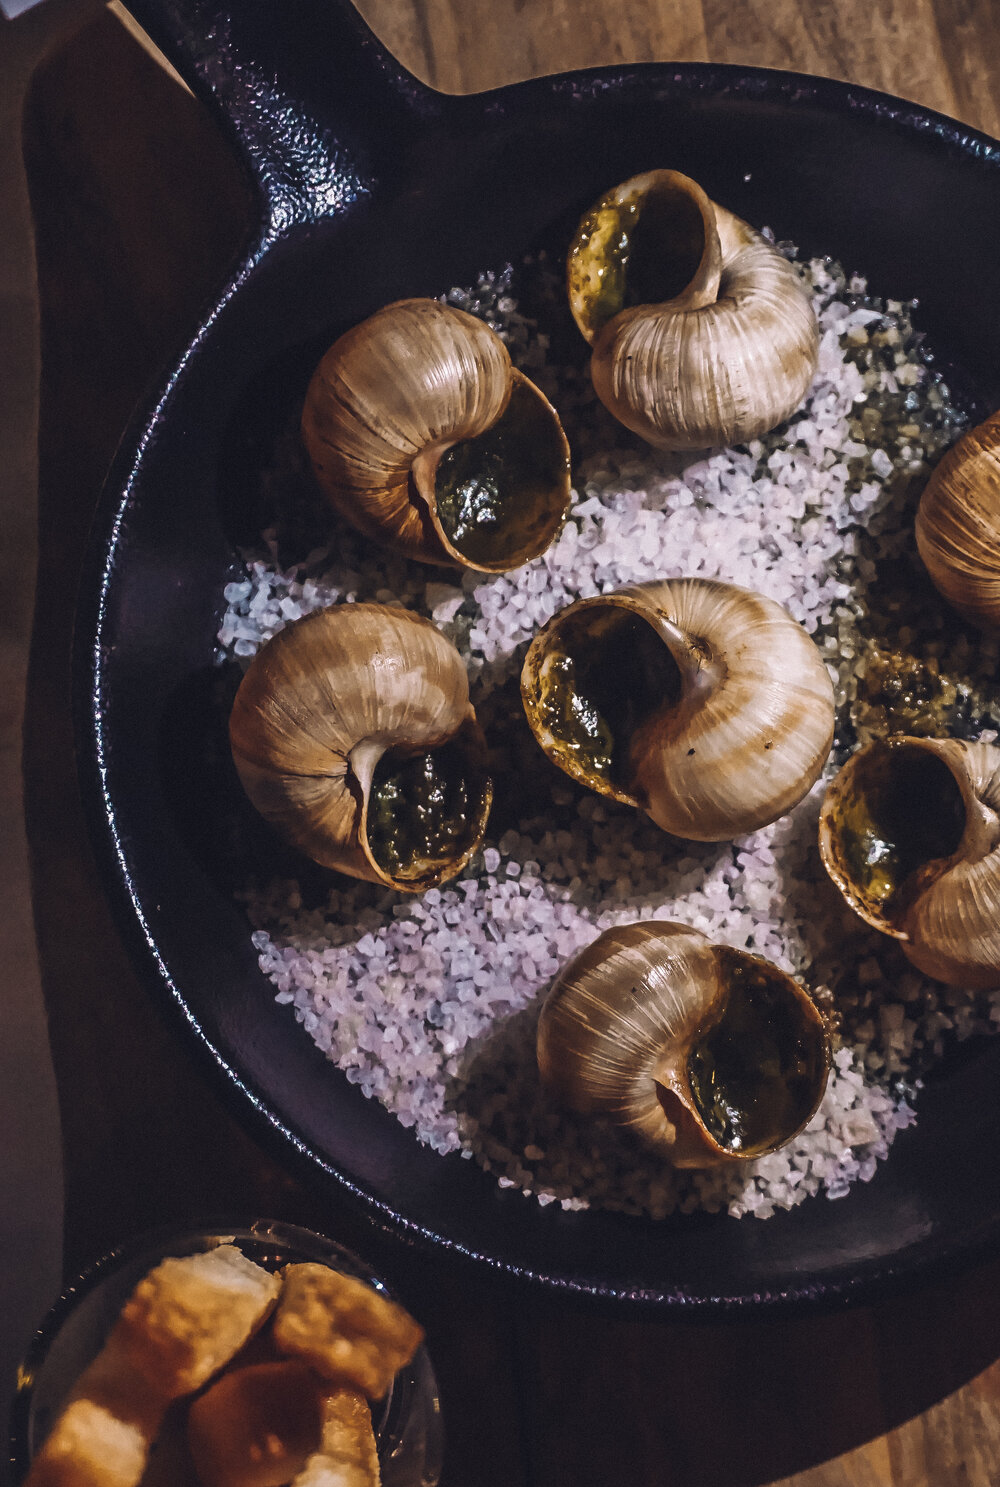 Burgundy snails, toasted bread